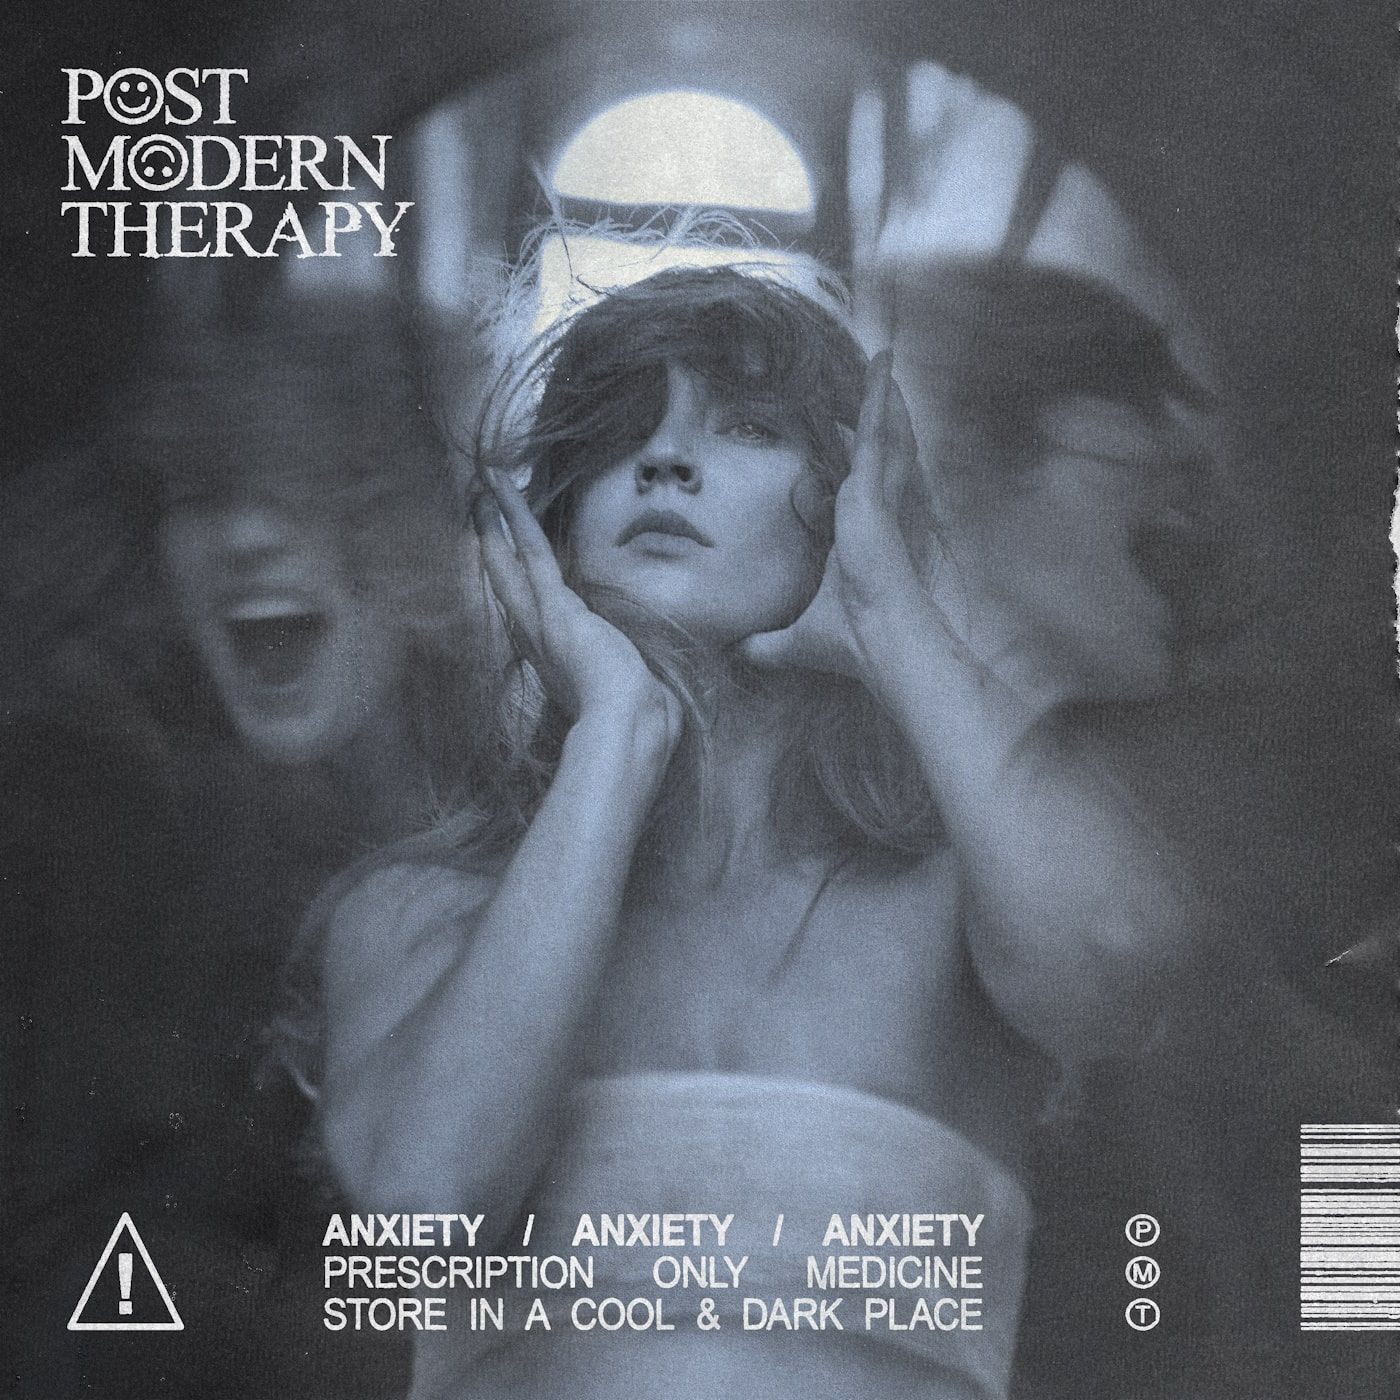 POST MODERN THERAPY